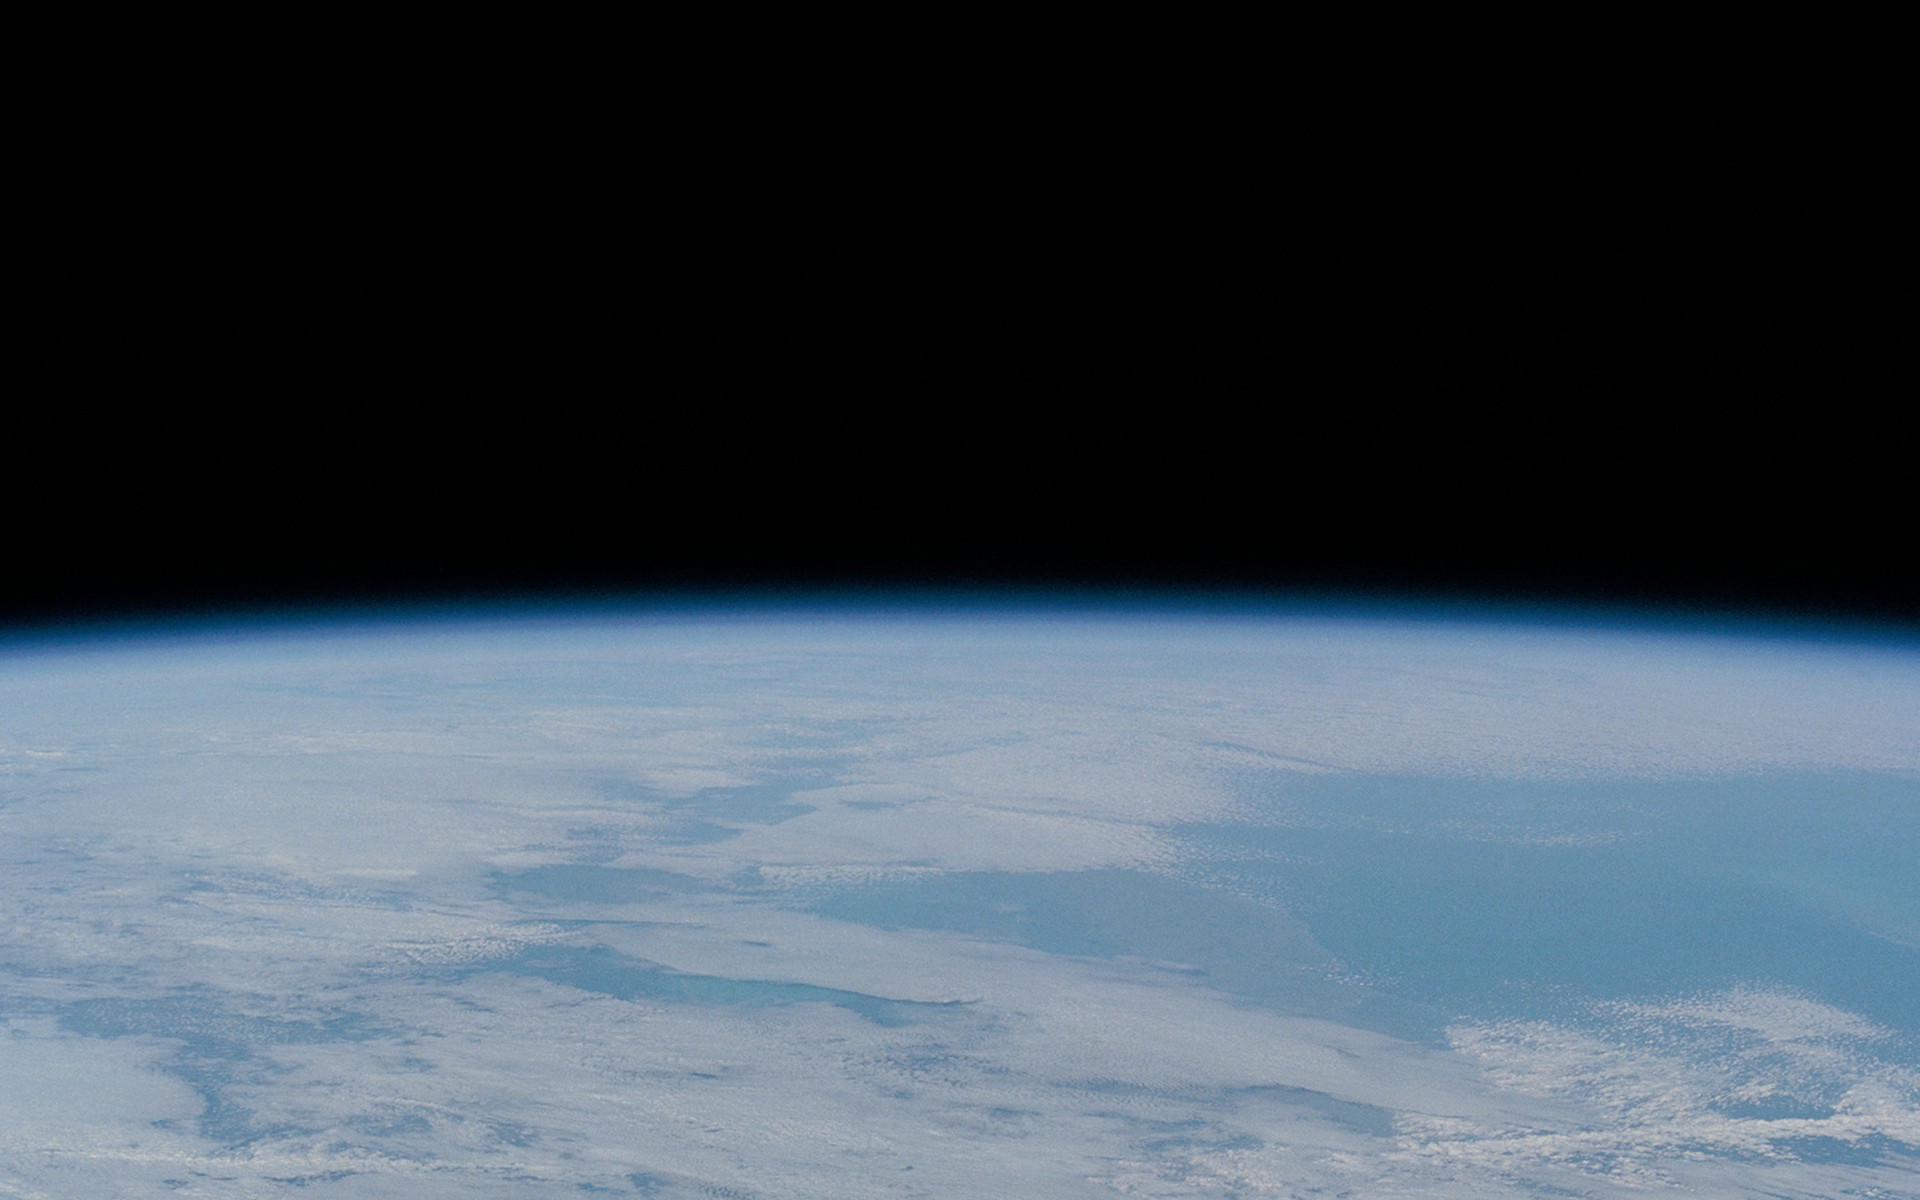  Earth from space